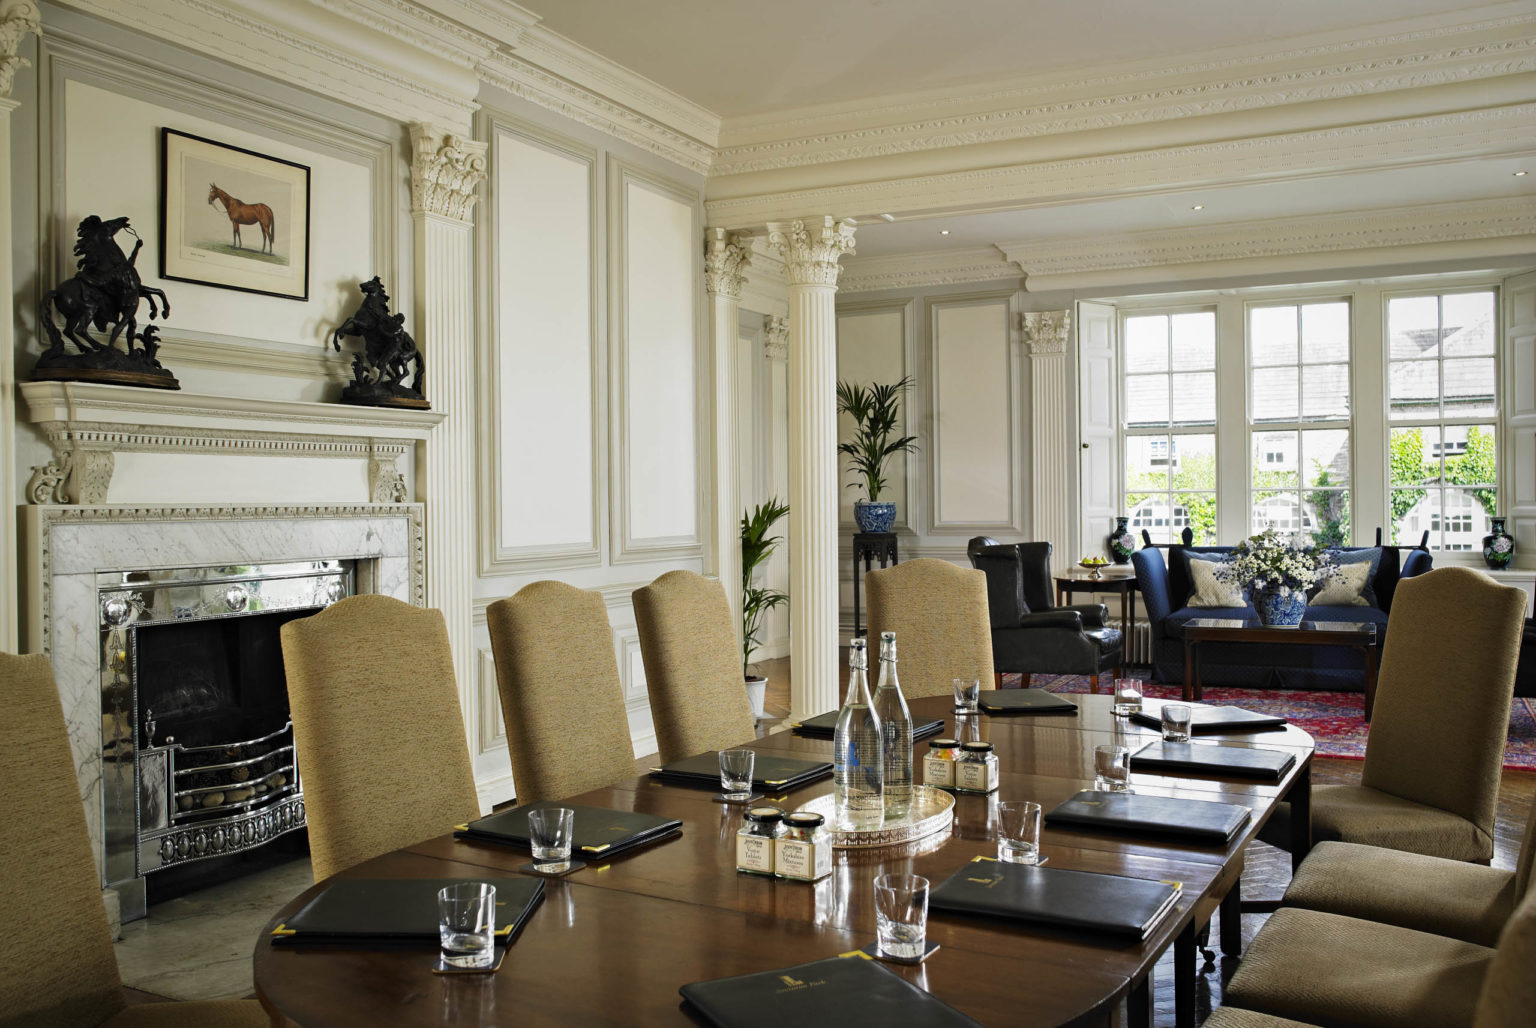 A meeting room at Swinton Park Hotel in North Yorkshire, suitable for larger corporate discussions and events